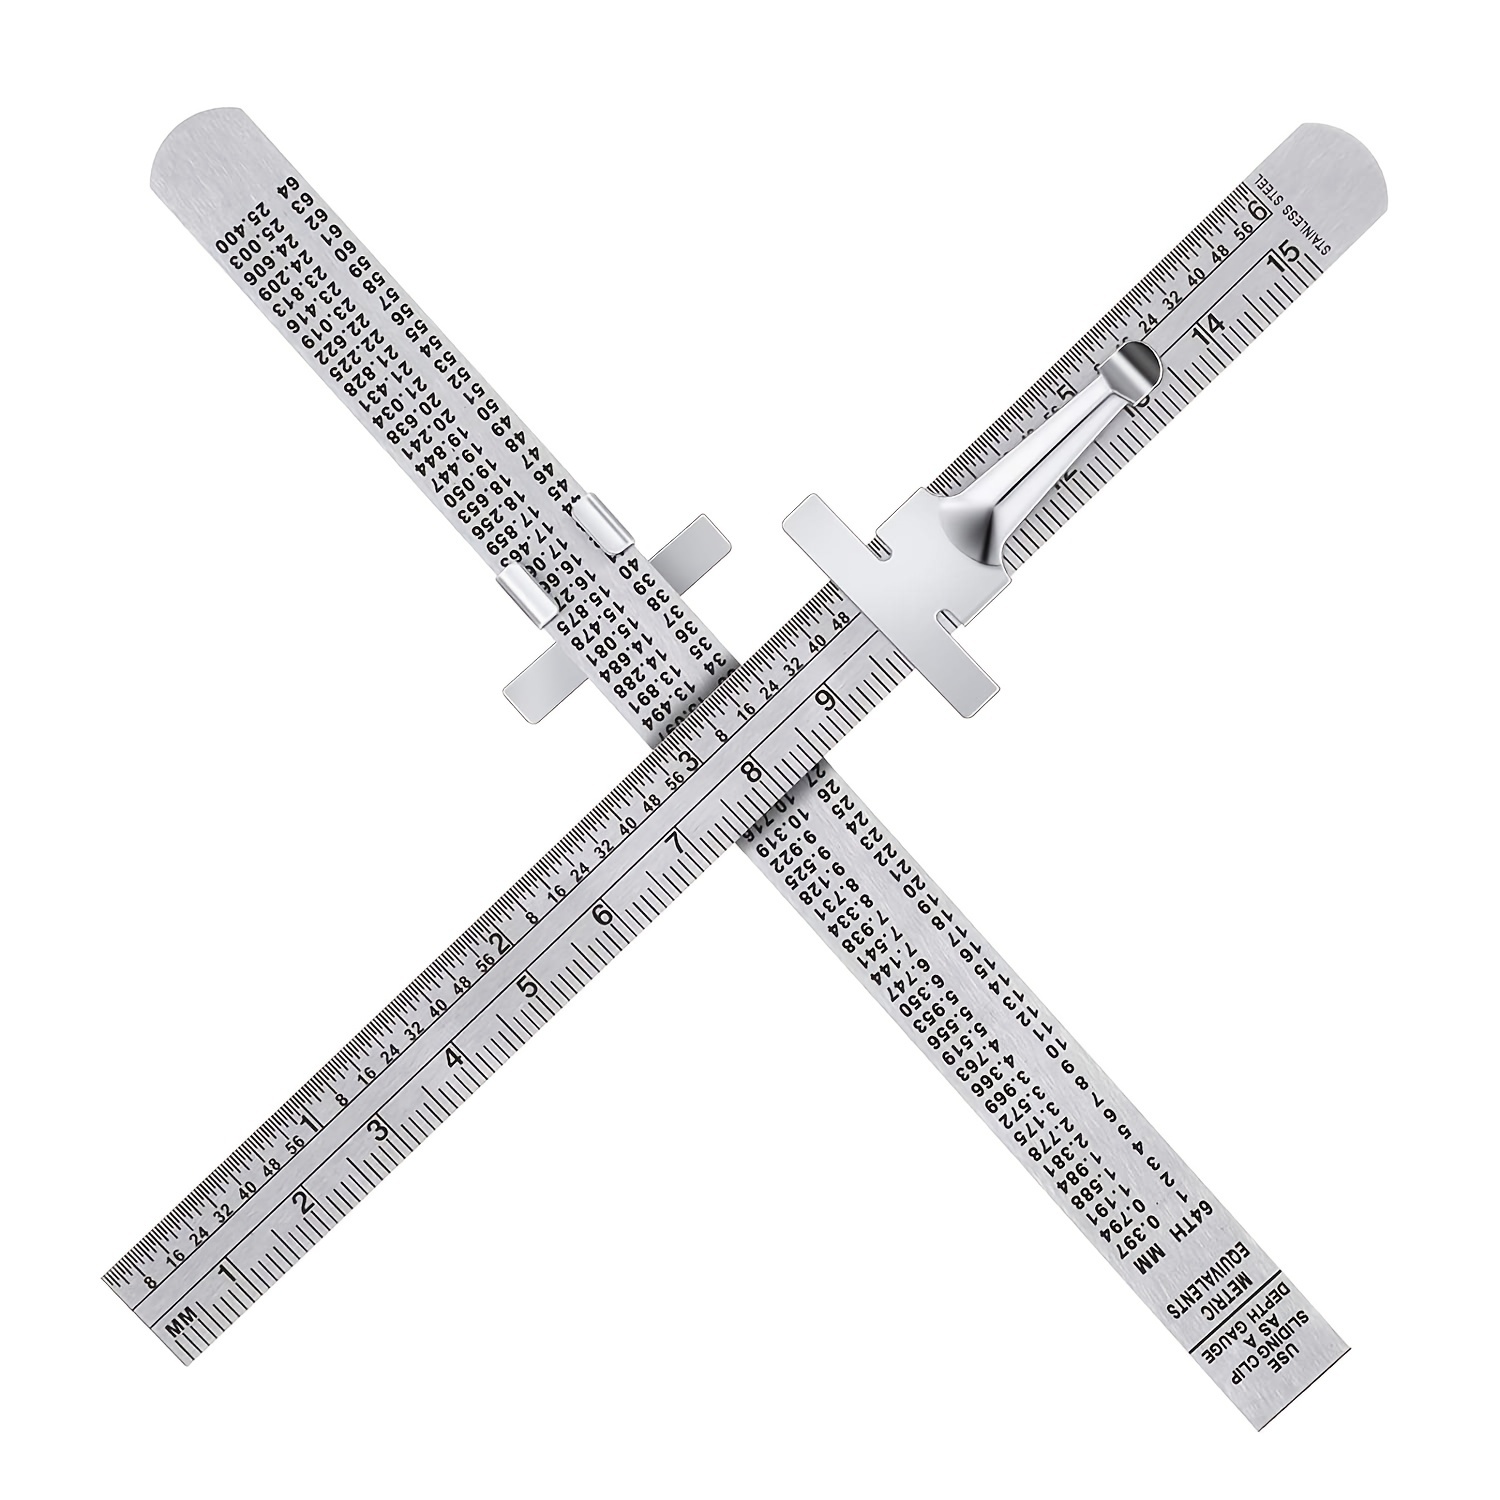 6 inch / 15 cm Stainless Steel Metal Straight Ruler Precision BUY